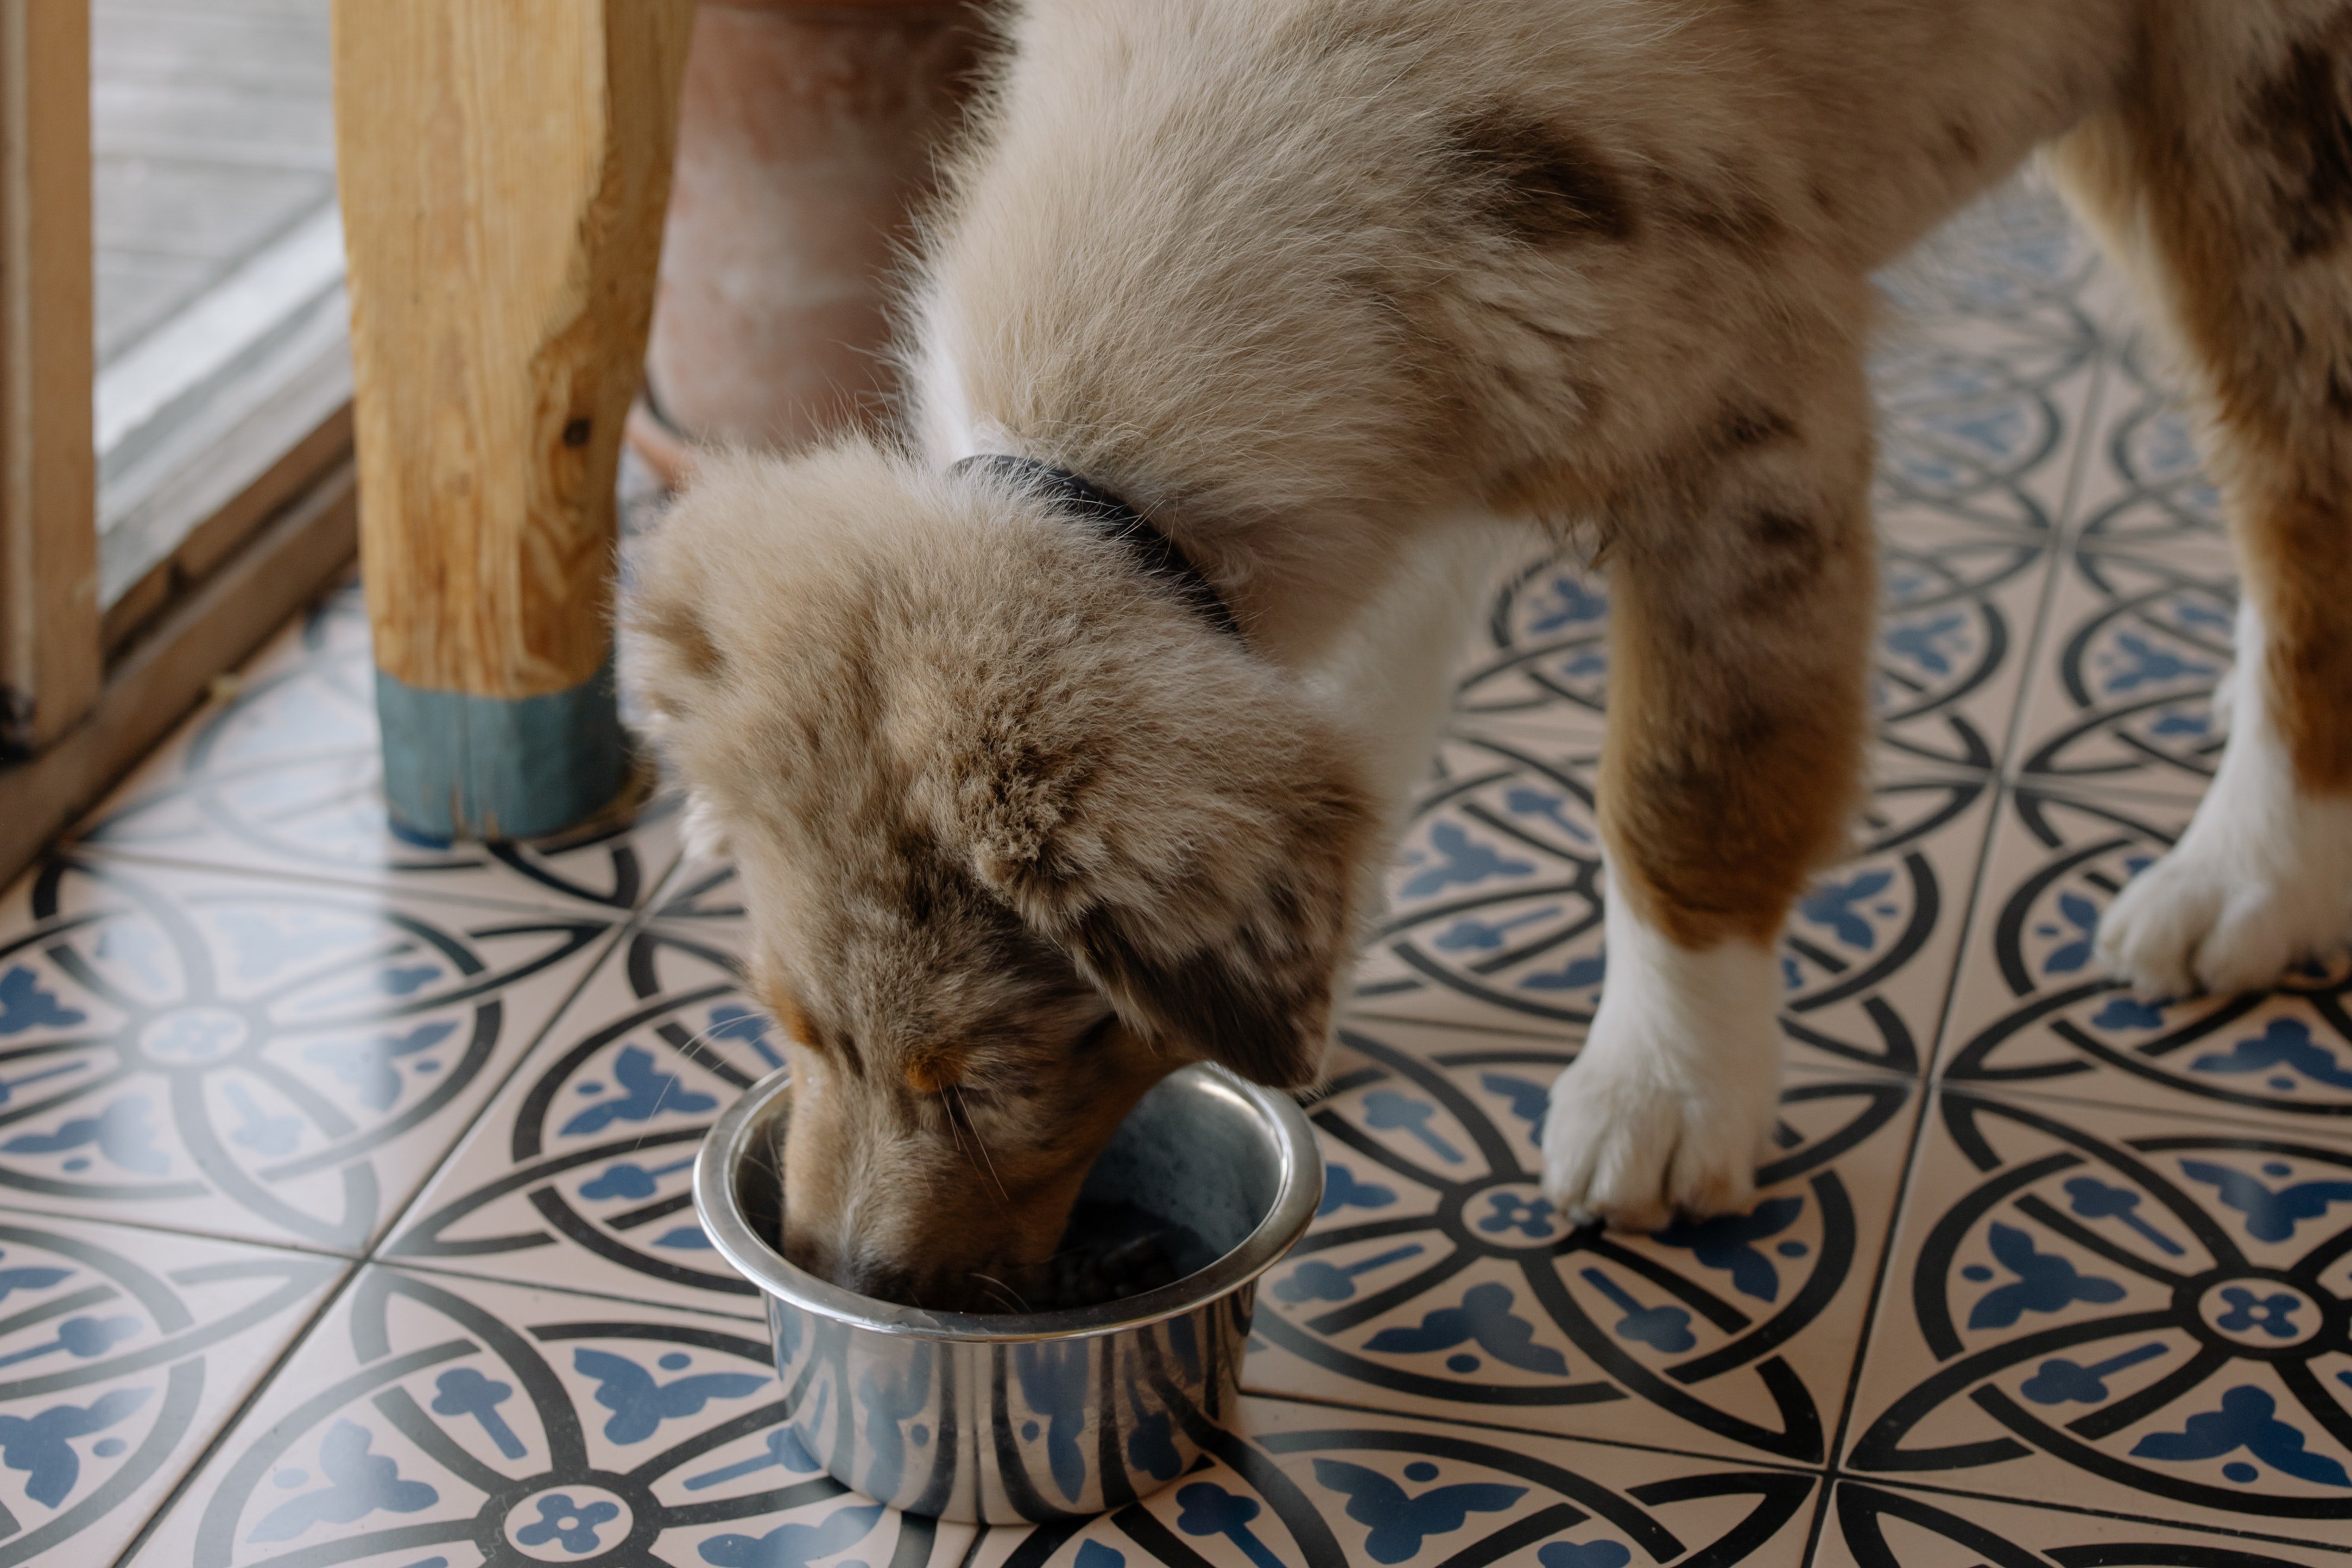 The hungry dog pounced on the food as soon as Peter offered it to him. | Source: Pexels